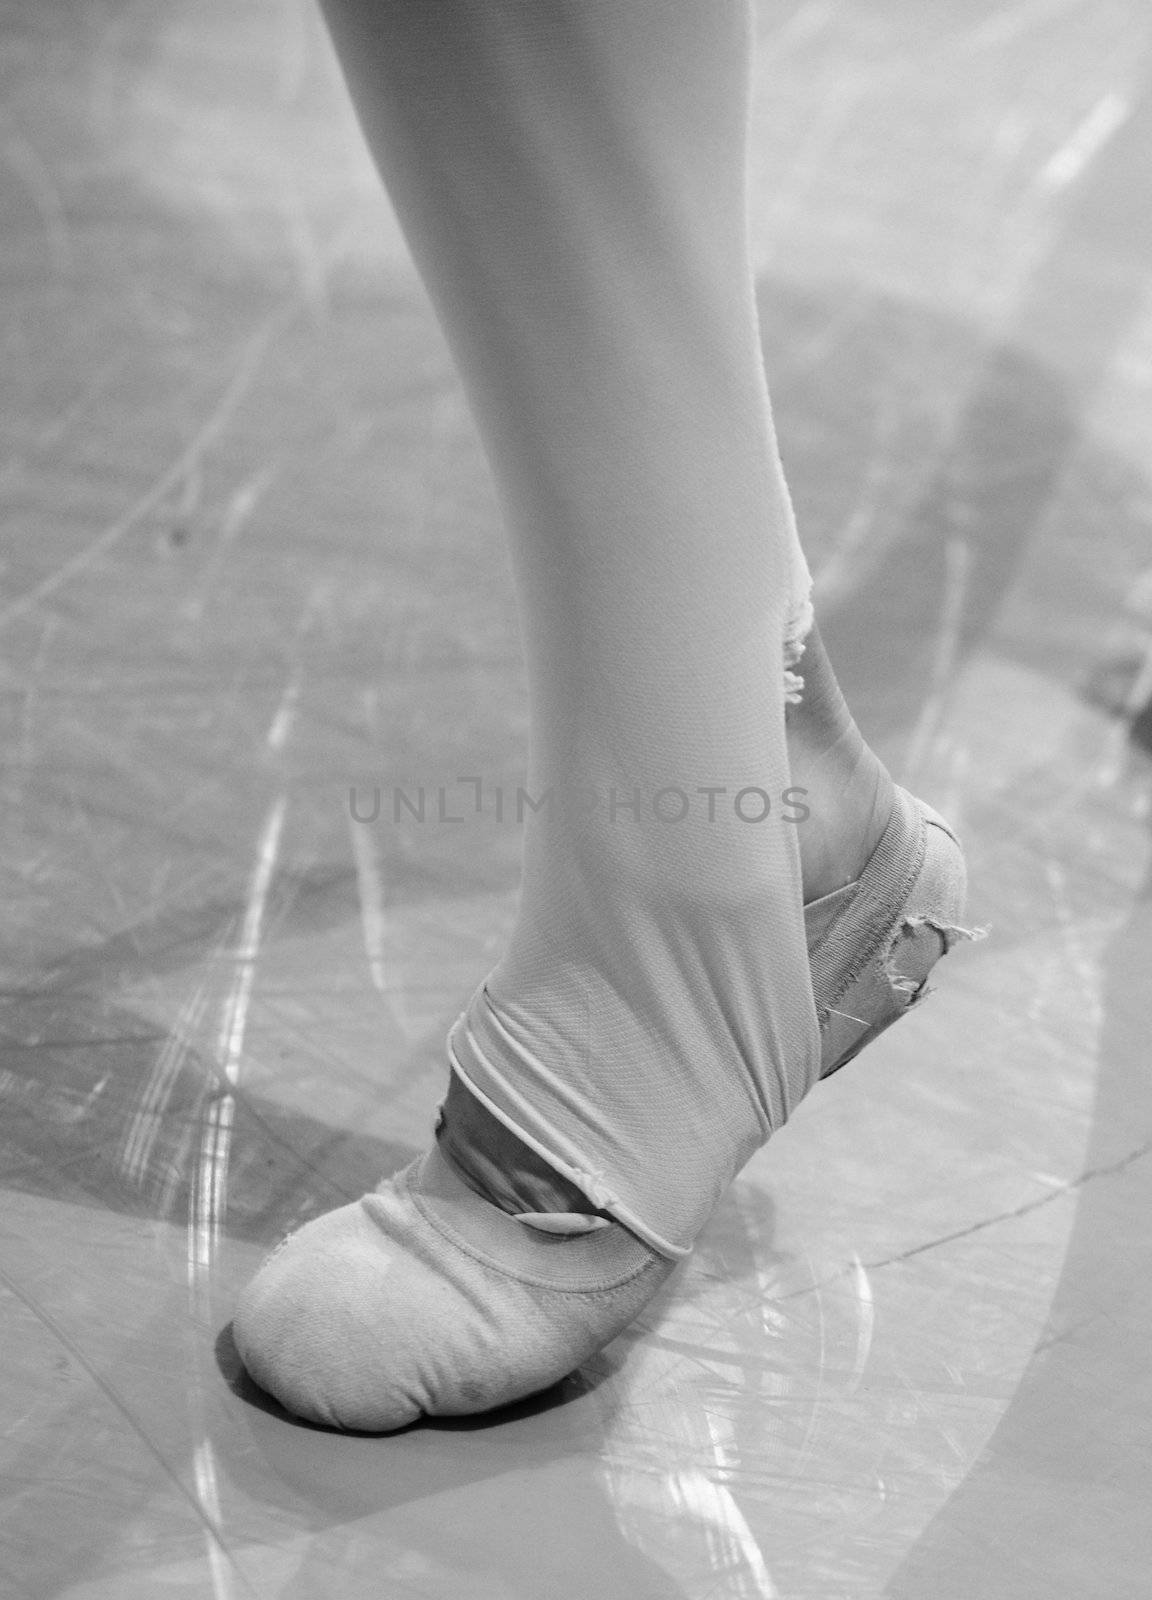 worn out shoes on a ballet dancer by ftlaudgirl